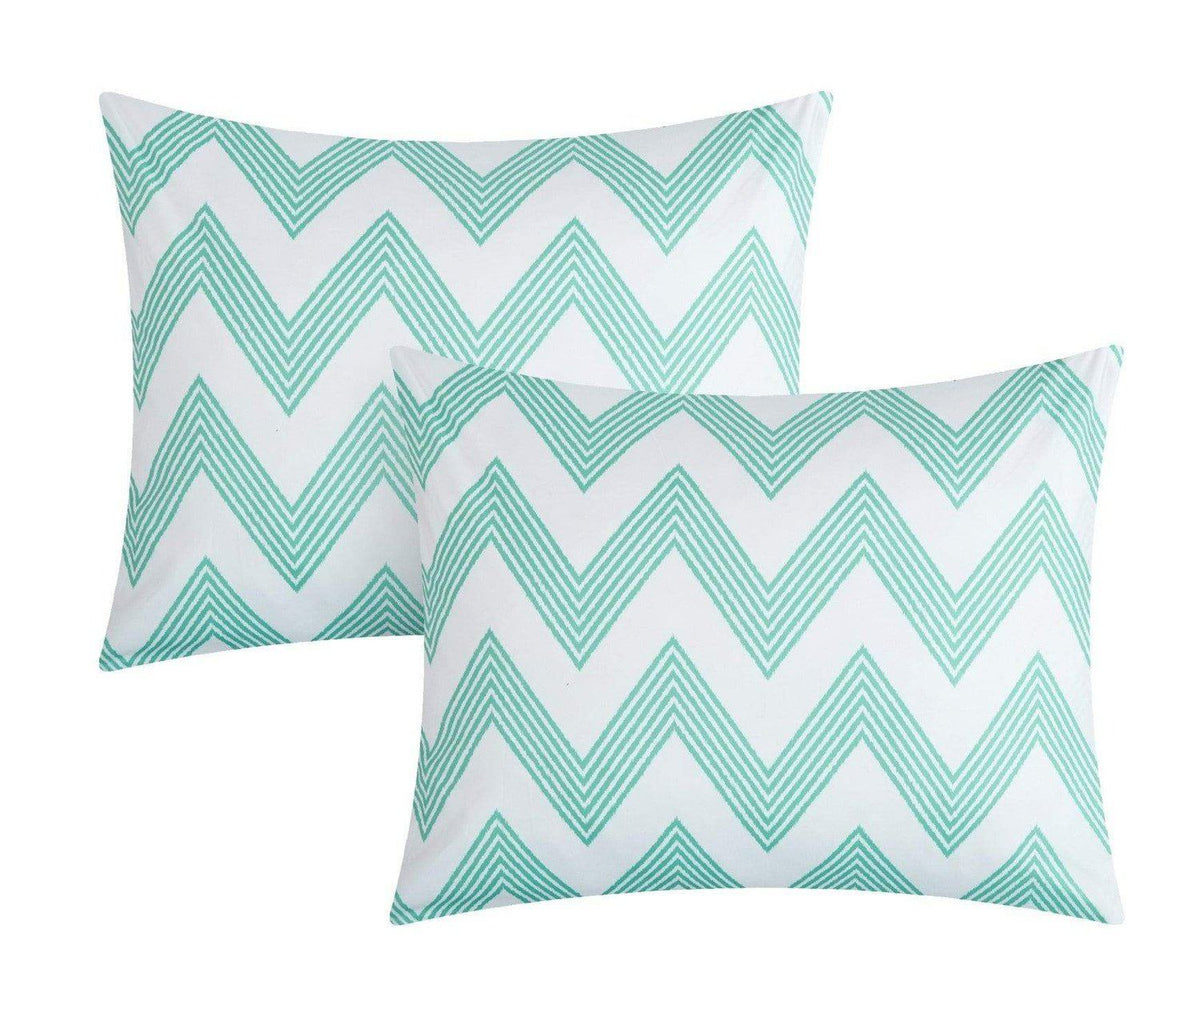 Chic Home 9 Piece Louisville Pinch Chevron Print Reversible Bed in a Bag  Comforter Set Sheets, Full, Aqua